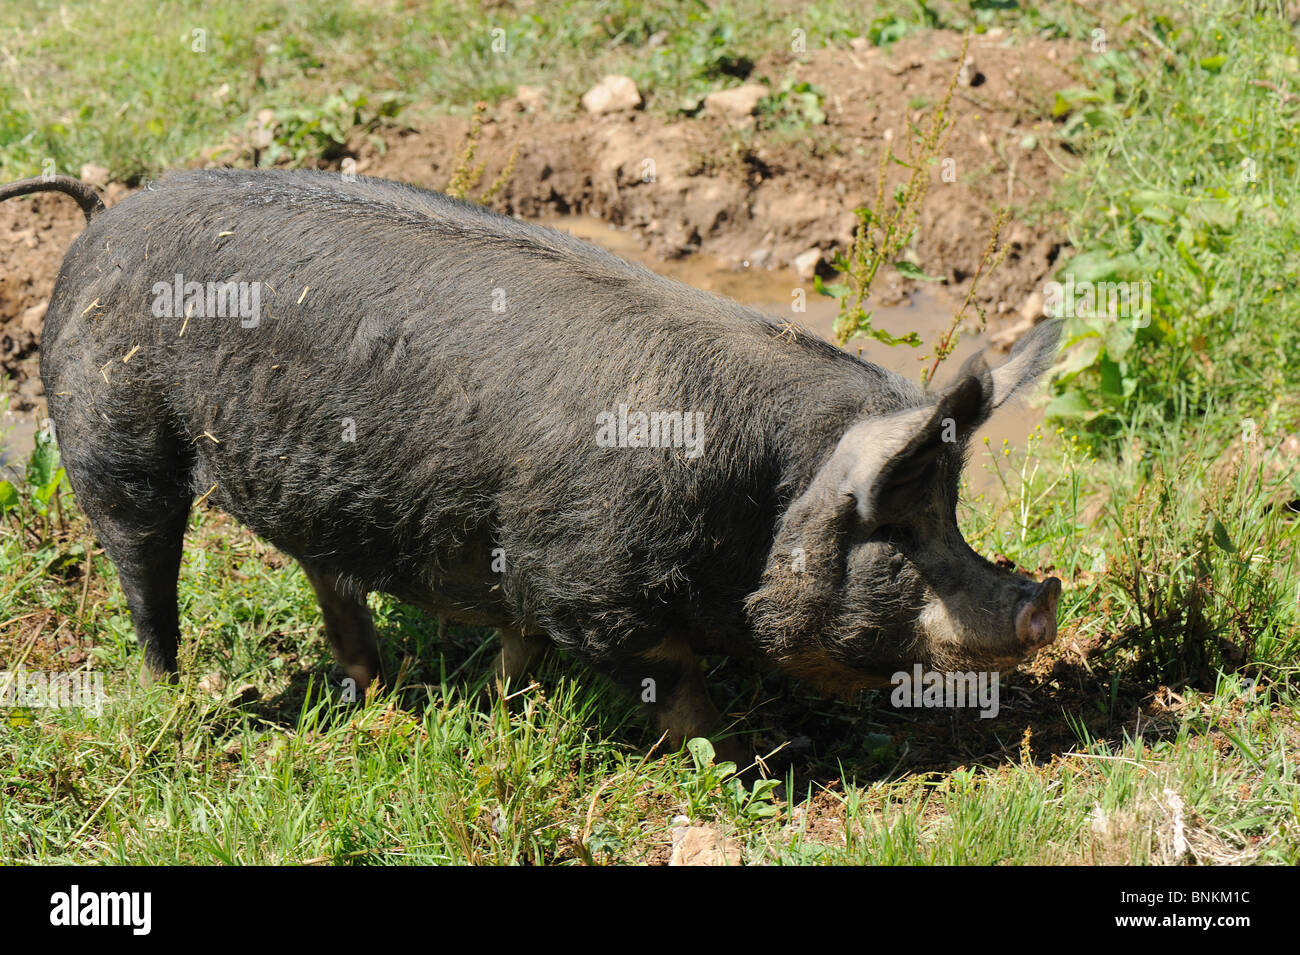 Berkshire sow beside watering hole in domestic setting Stock Photo